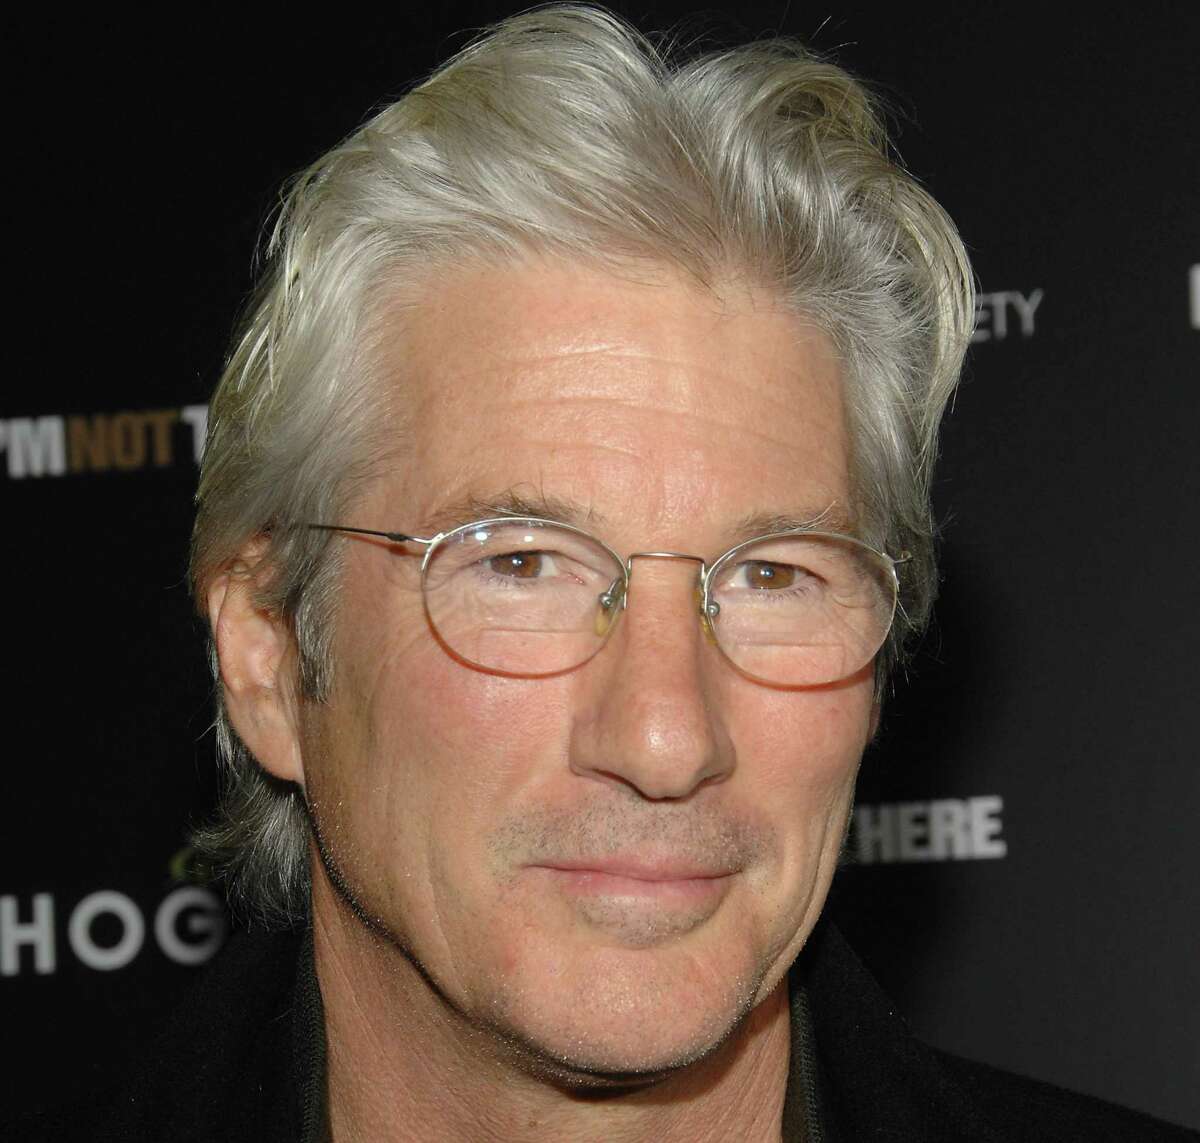 ** FILE ** Actor Richard Gere attends a special Cinema Society hosted screening of "I'm Not There" at the Chelsea West Cinemas, in this Nov. 13, 2007, file photo in New York.